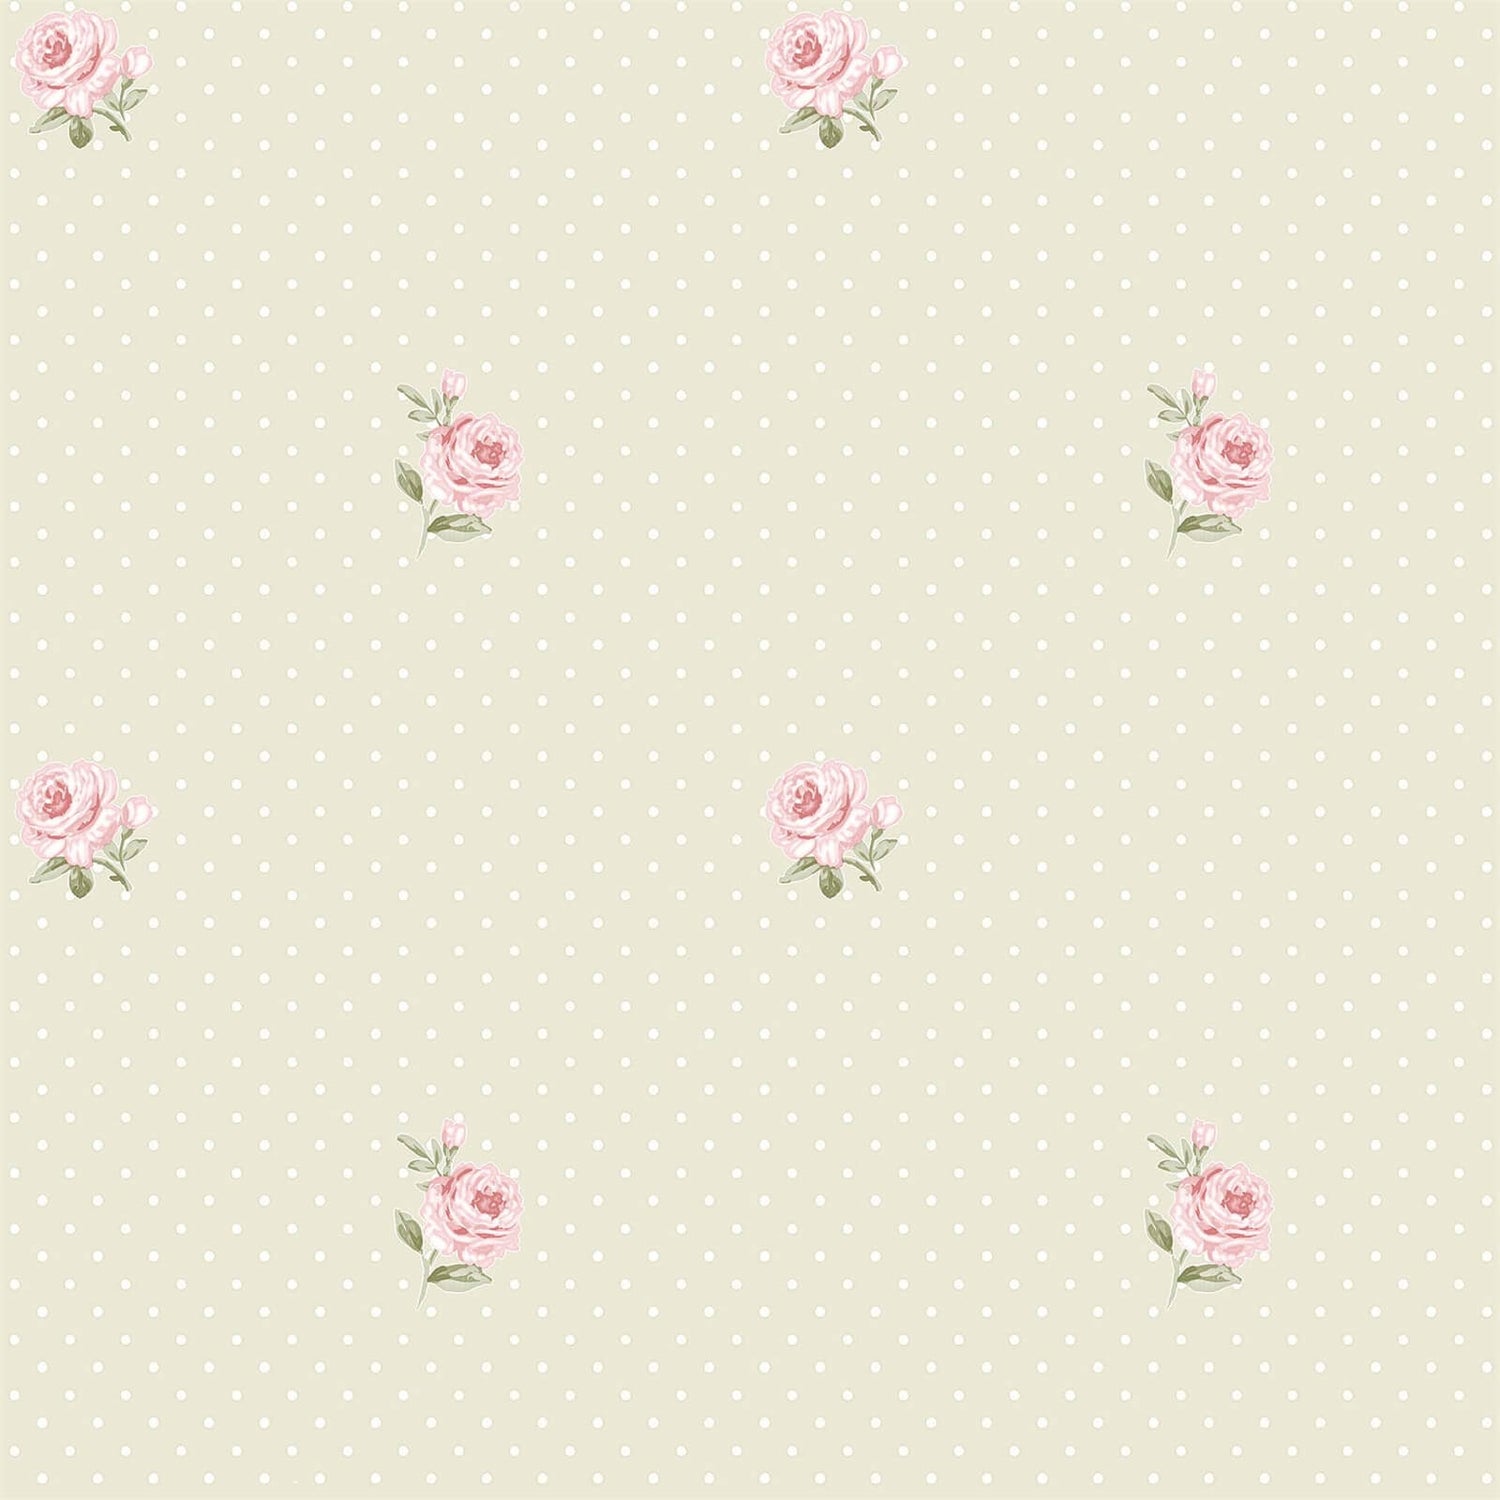 scattered pink roses  Iphone background pattern Floral wallpaper Iphone  wallpaper